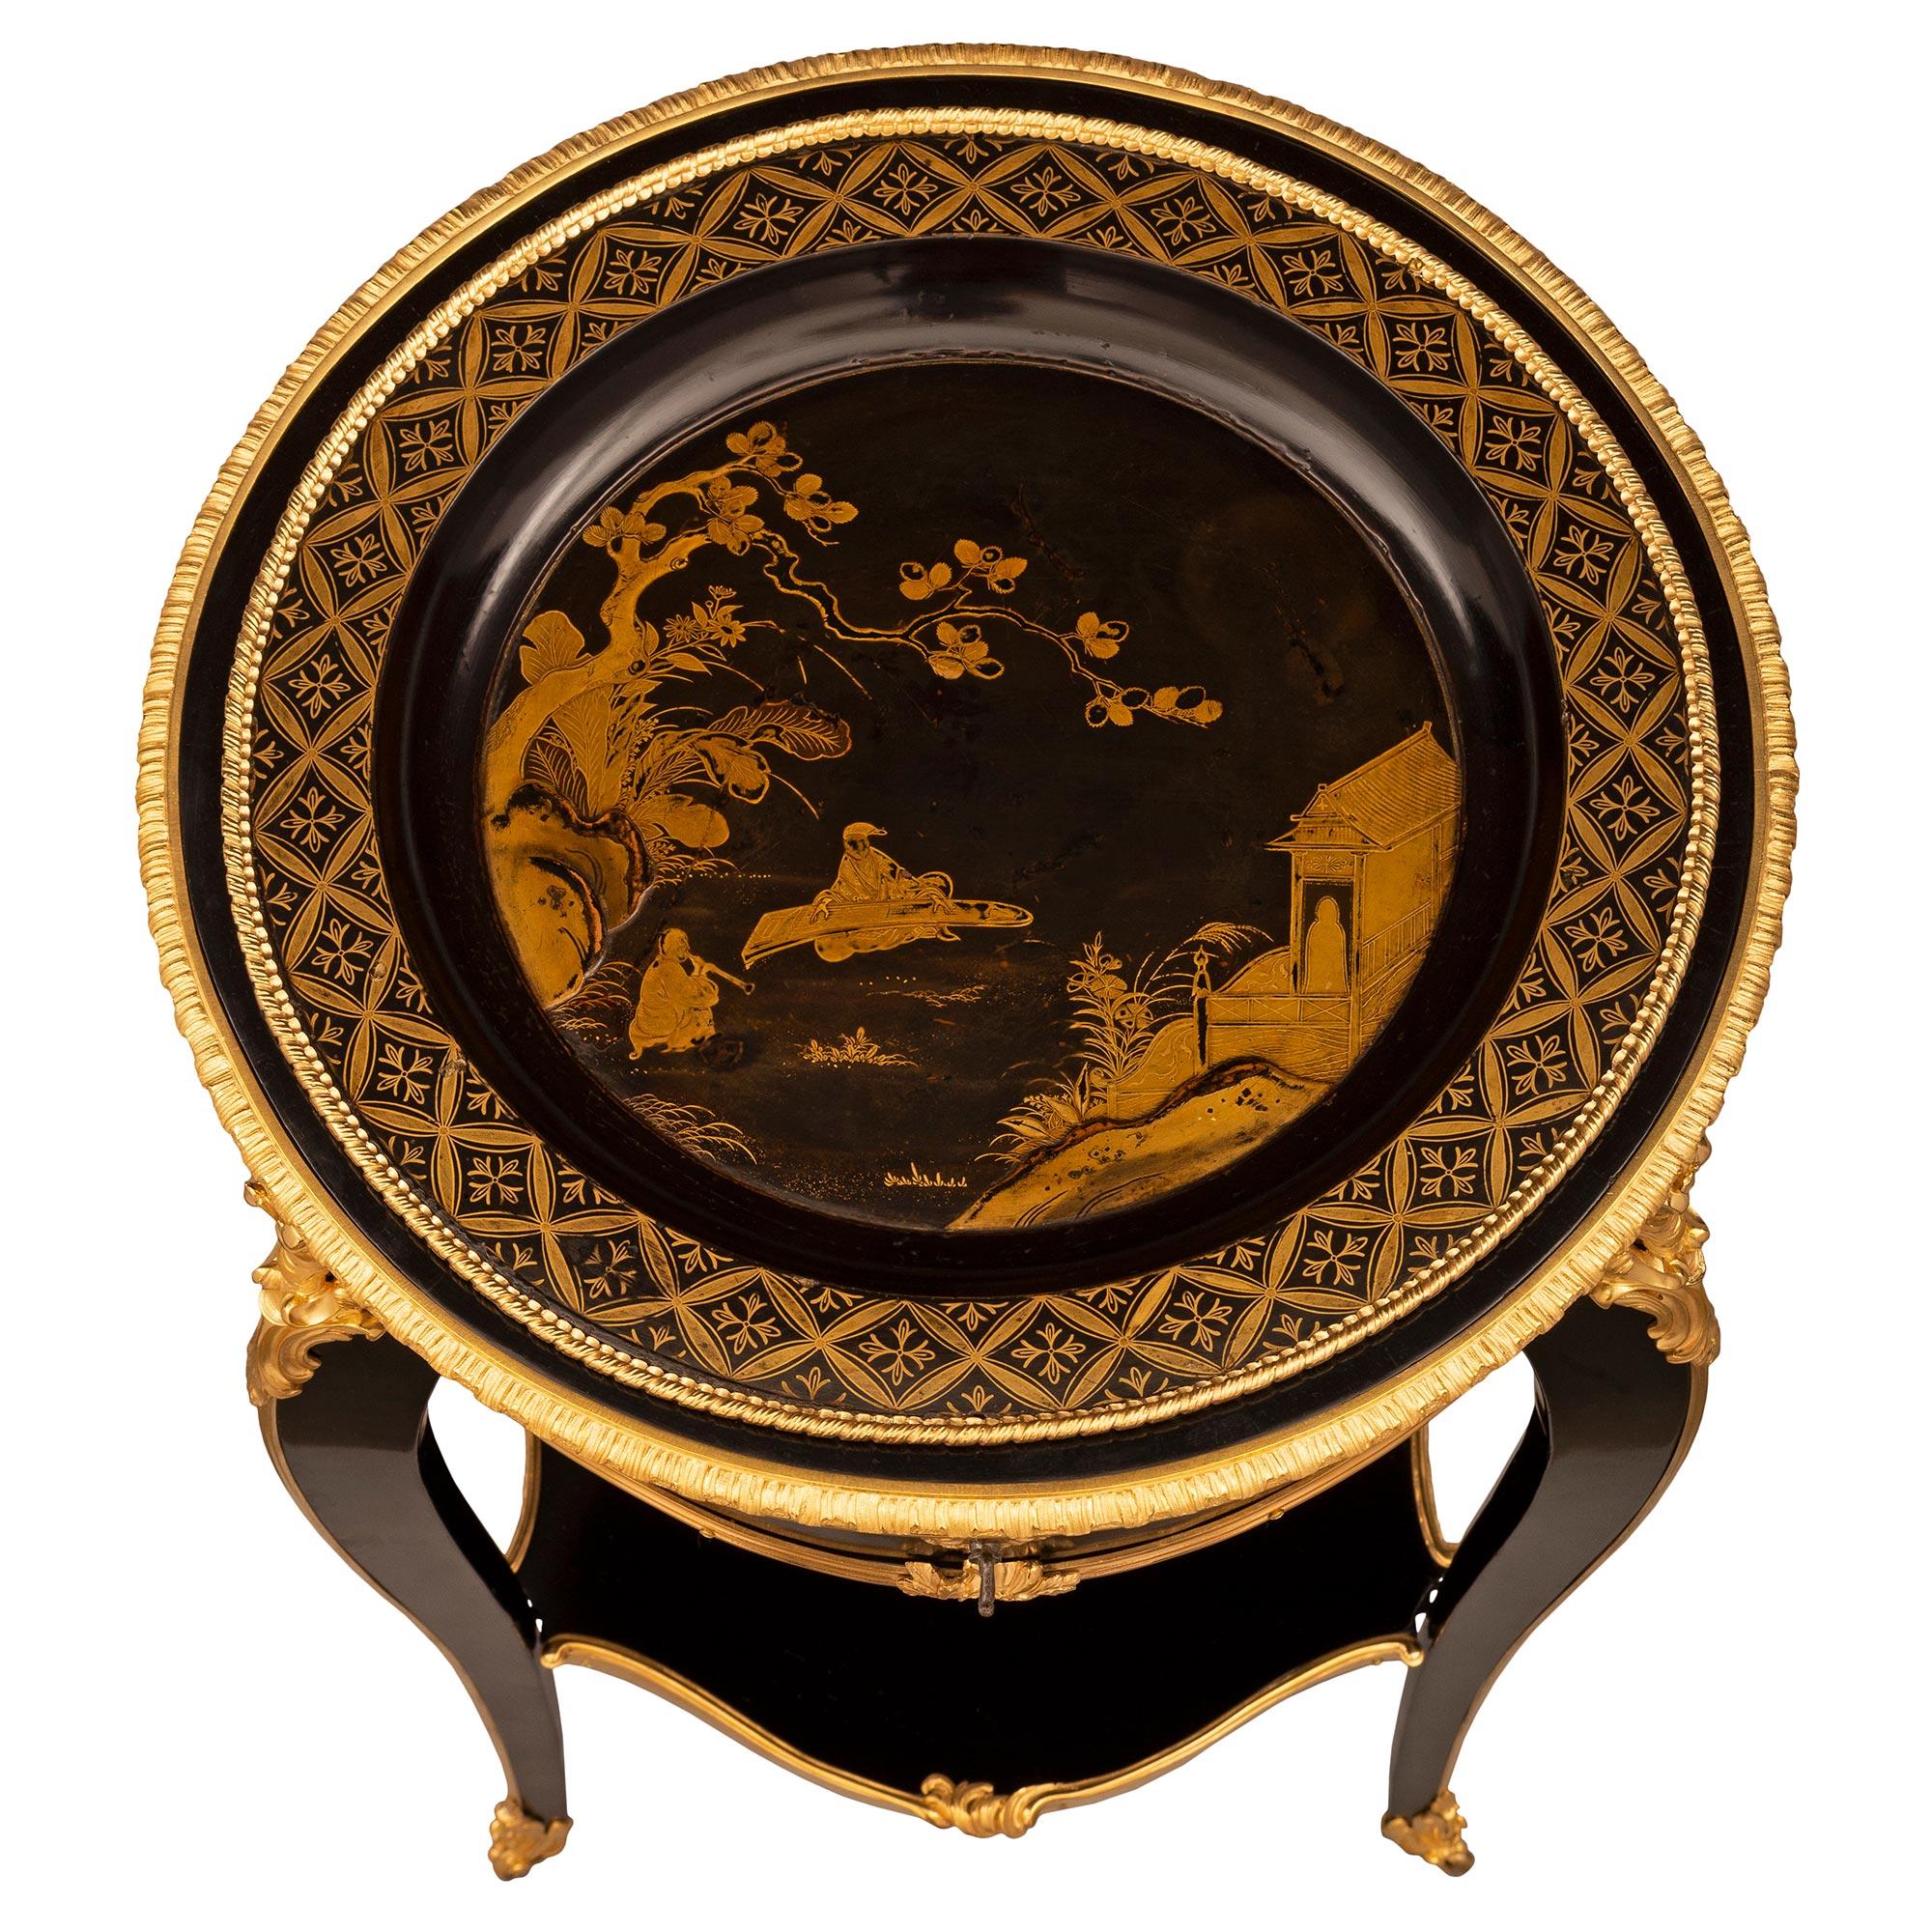 An exquisite French 19th century Louis XV st. Napoleon III period Ebony, ormolu, and Japanese black lacquer side table. The table is raised by three most elegant cabriole legs retaining their original casters below richly chased acanthus leaf fitted